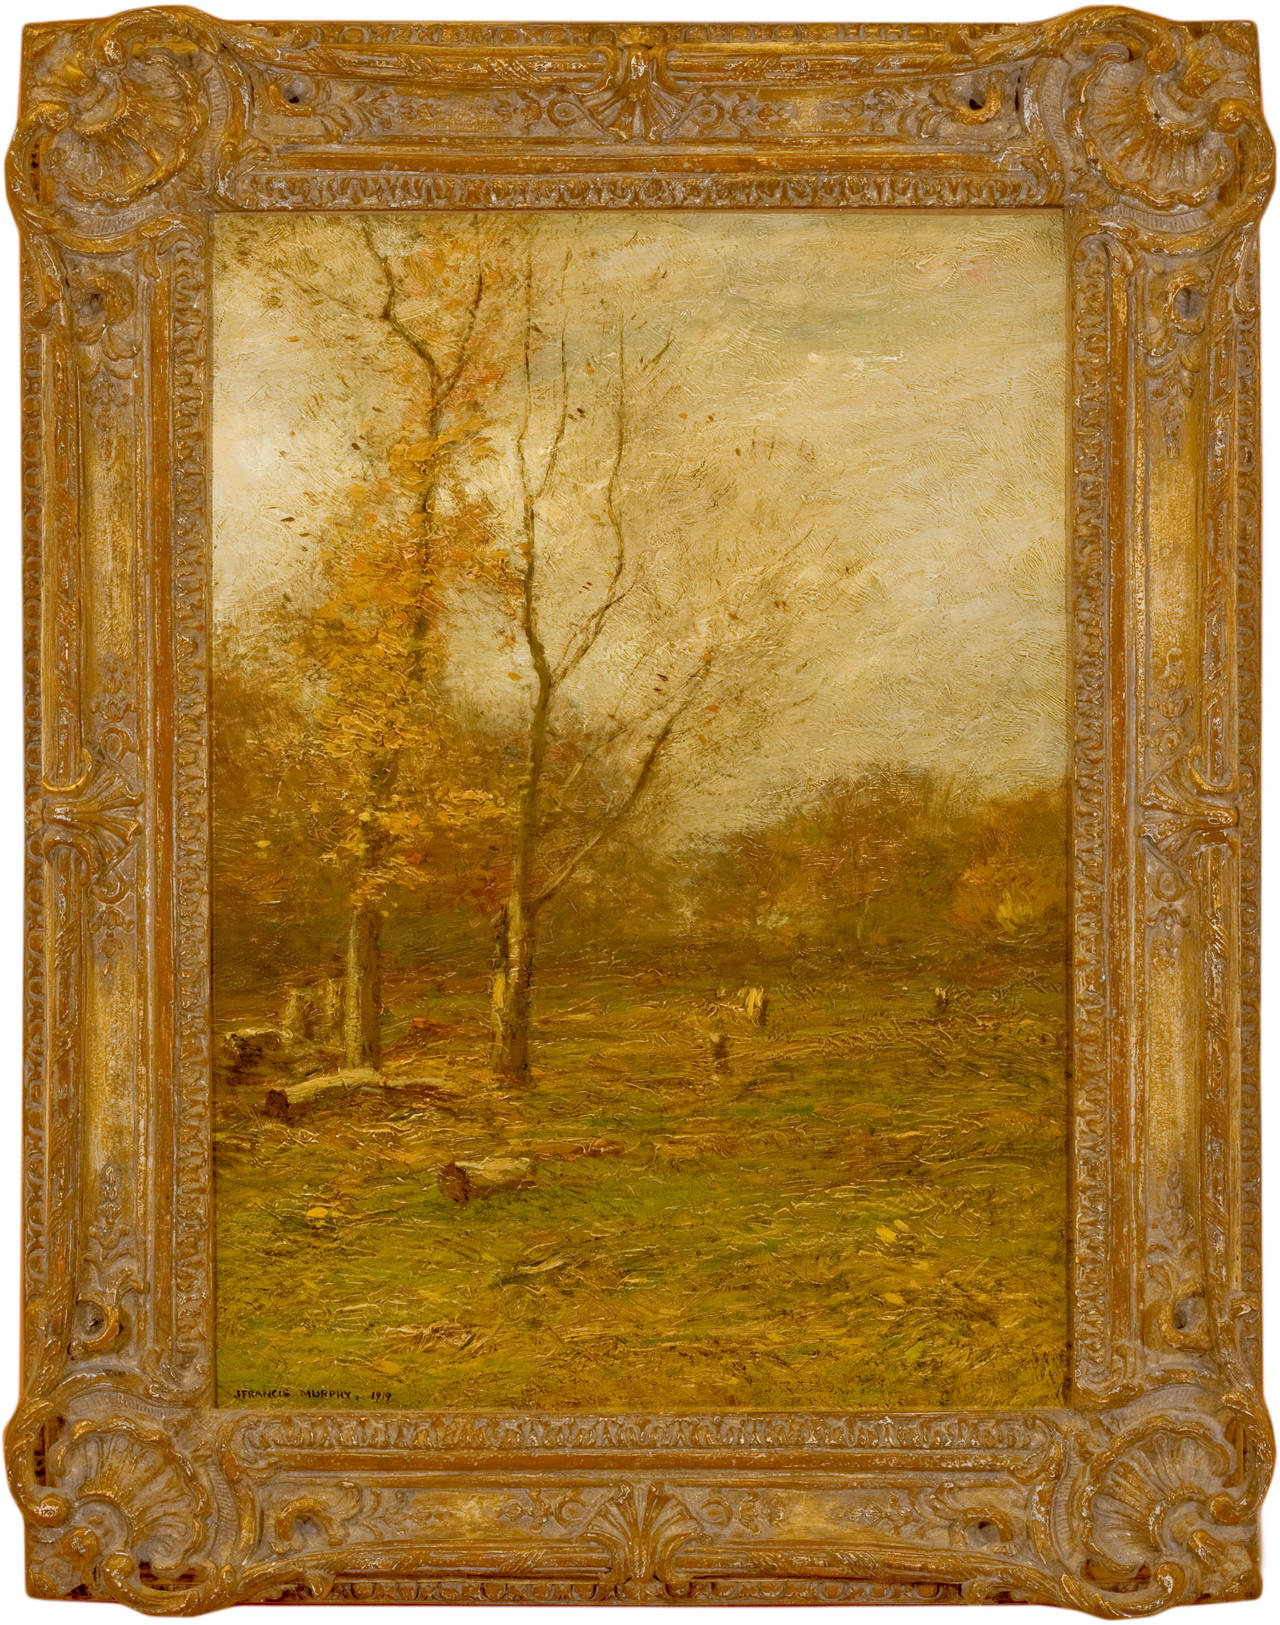 John Francis Murphy Landscape Painting - "An Old Clearing"